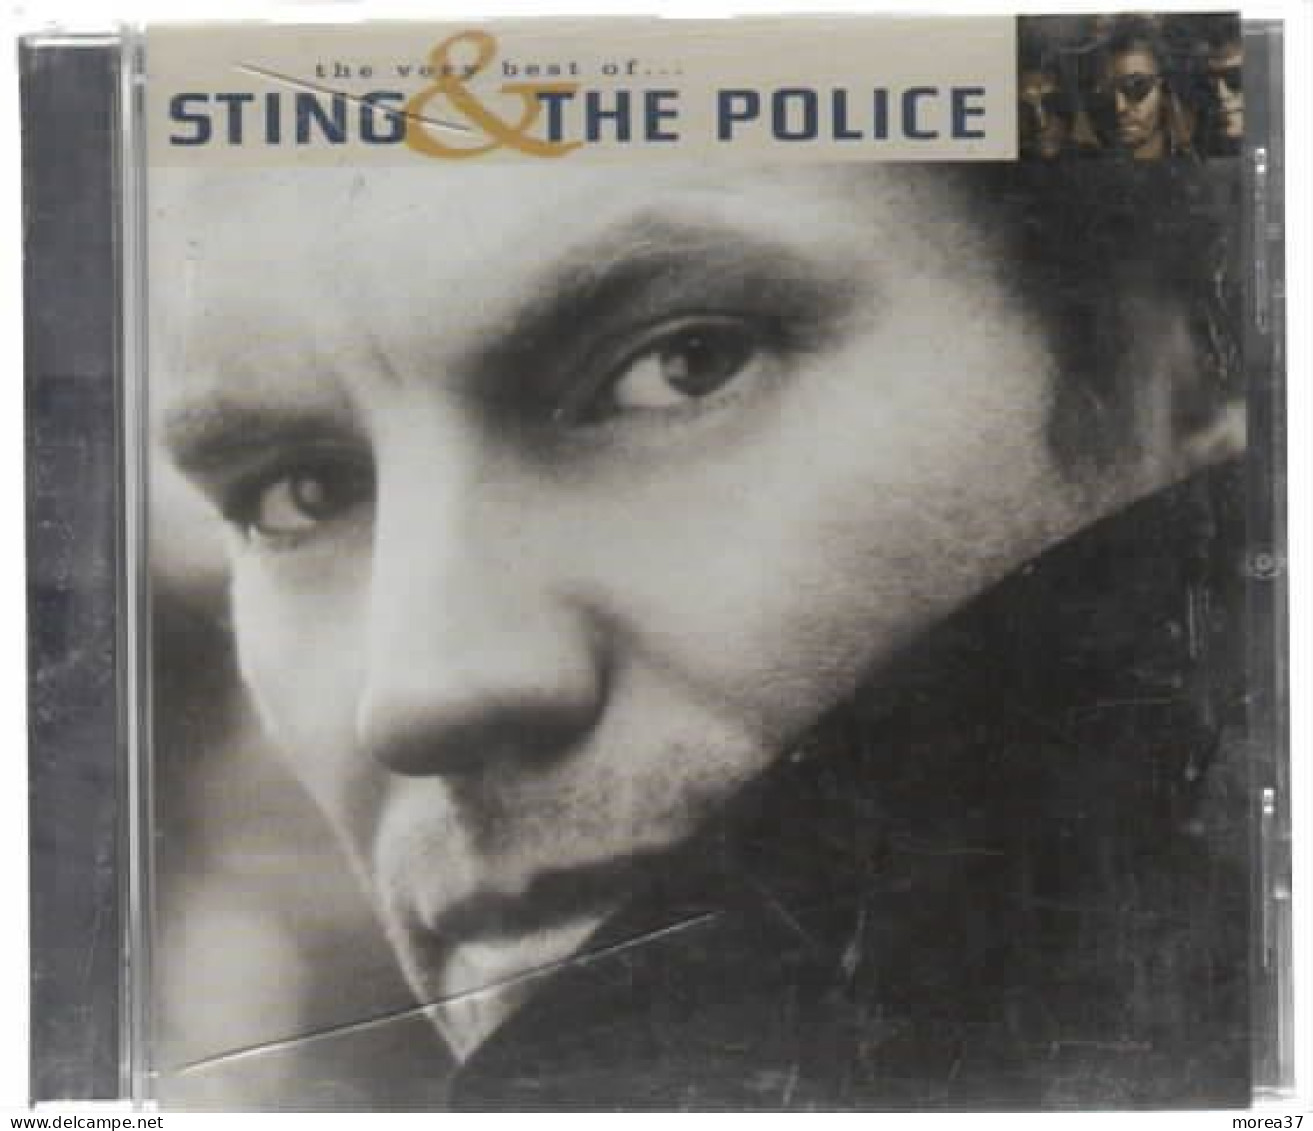 The Very Best Of Sting & The Police - Altri - Inglese